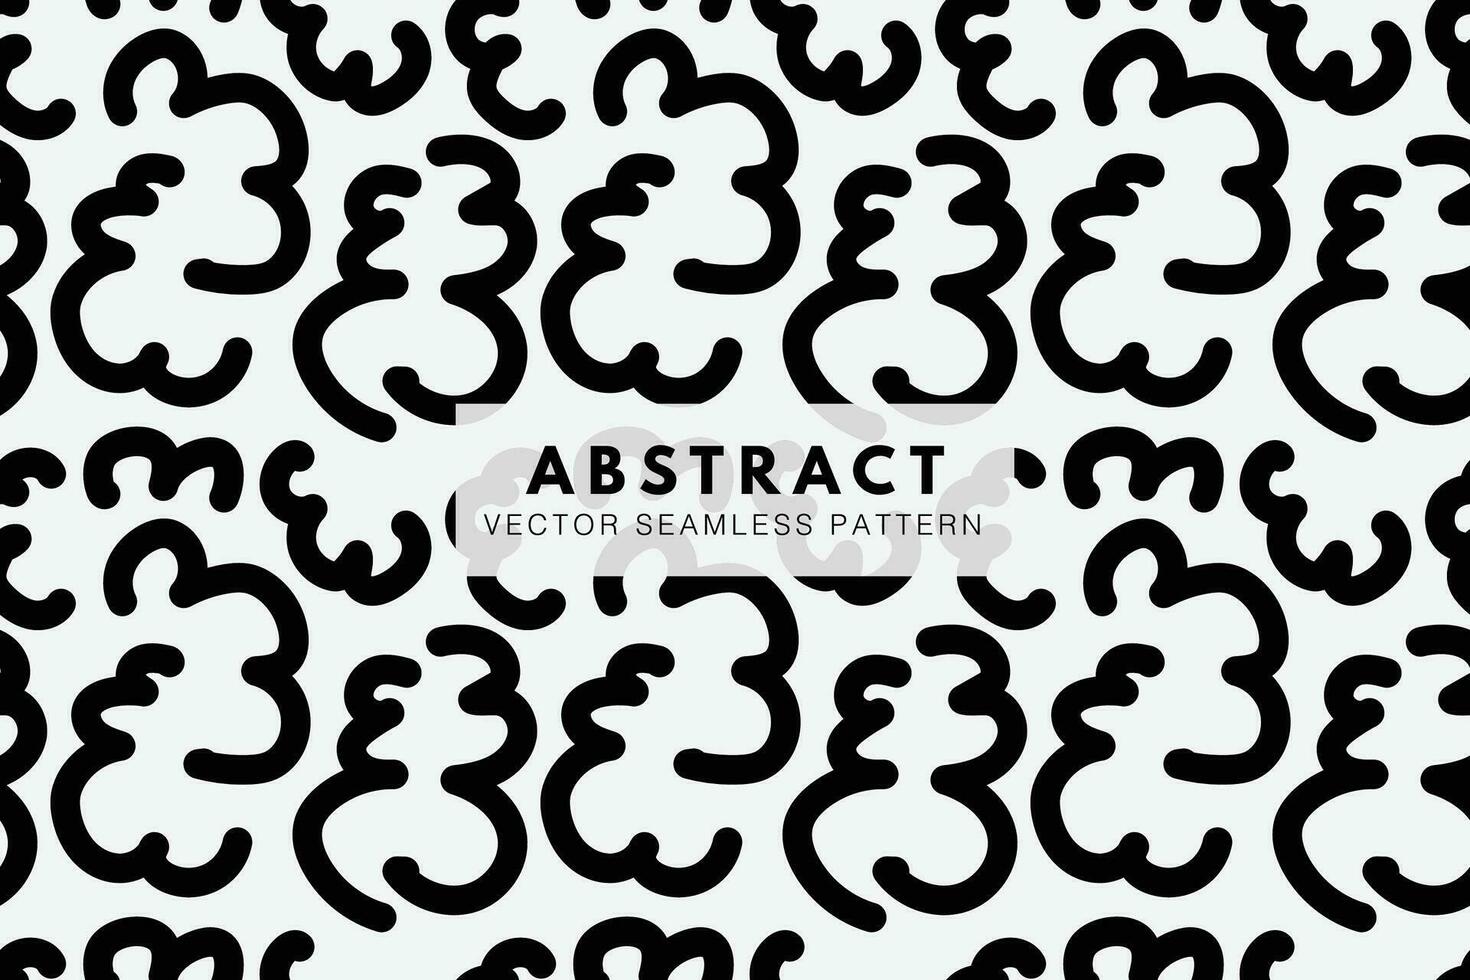 Curvy lines abstract seamless repeat vector pattern